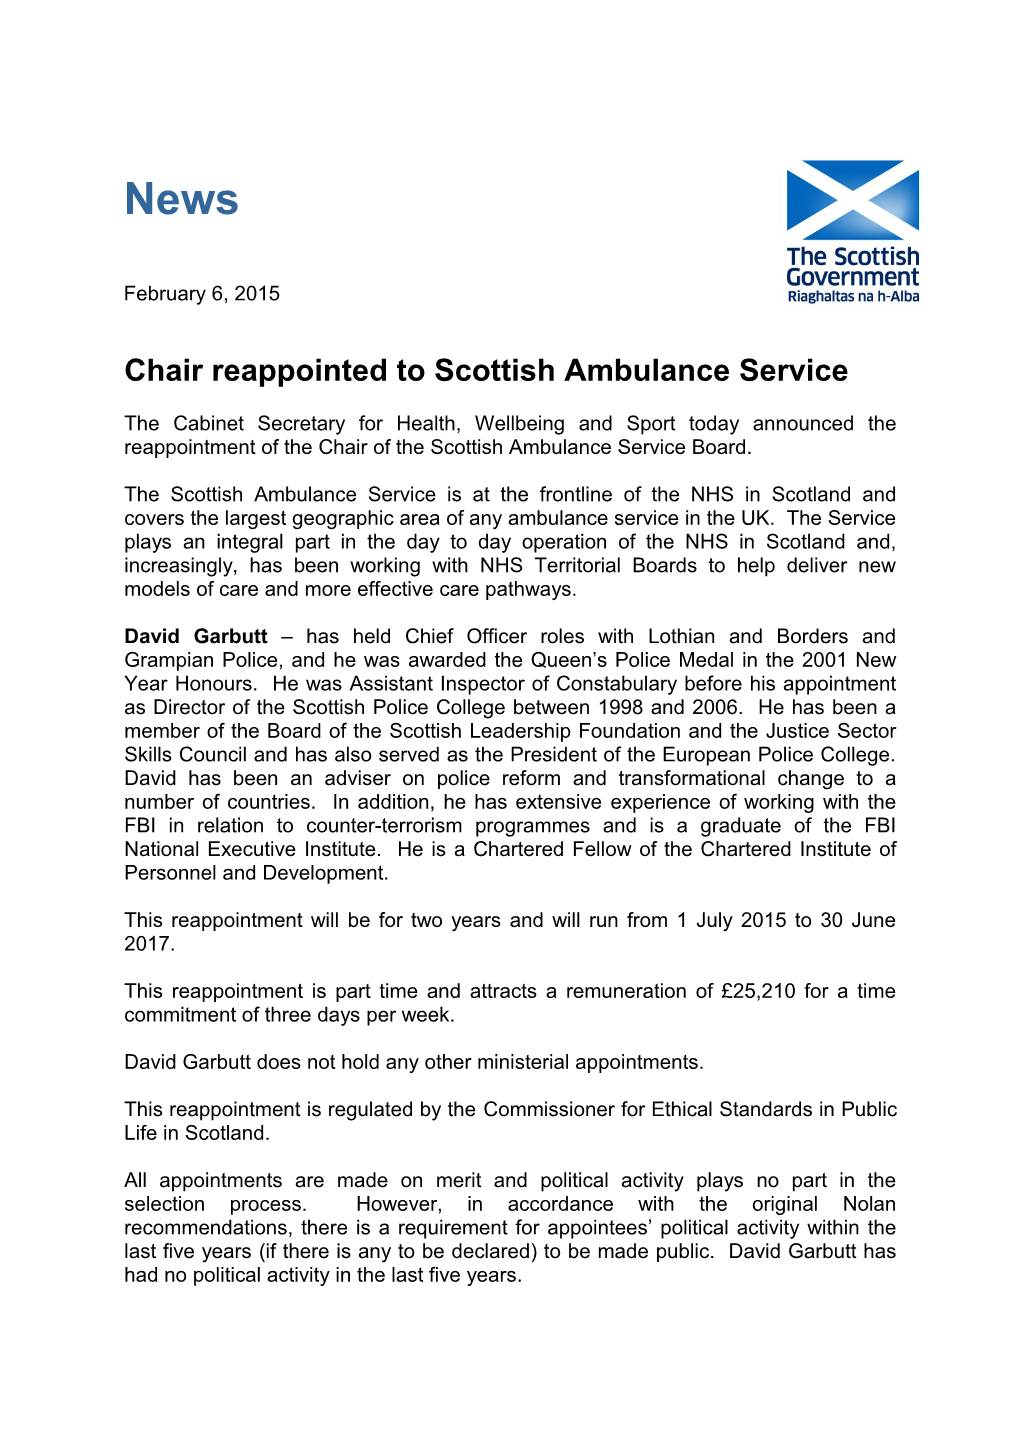 Chair Reappointed to Scottish Ambulance Service